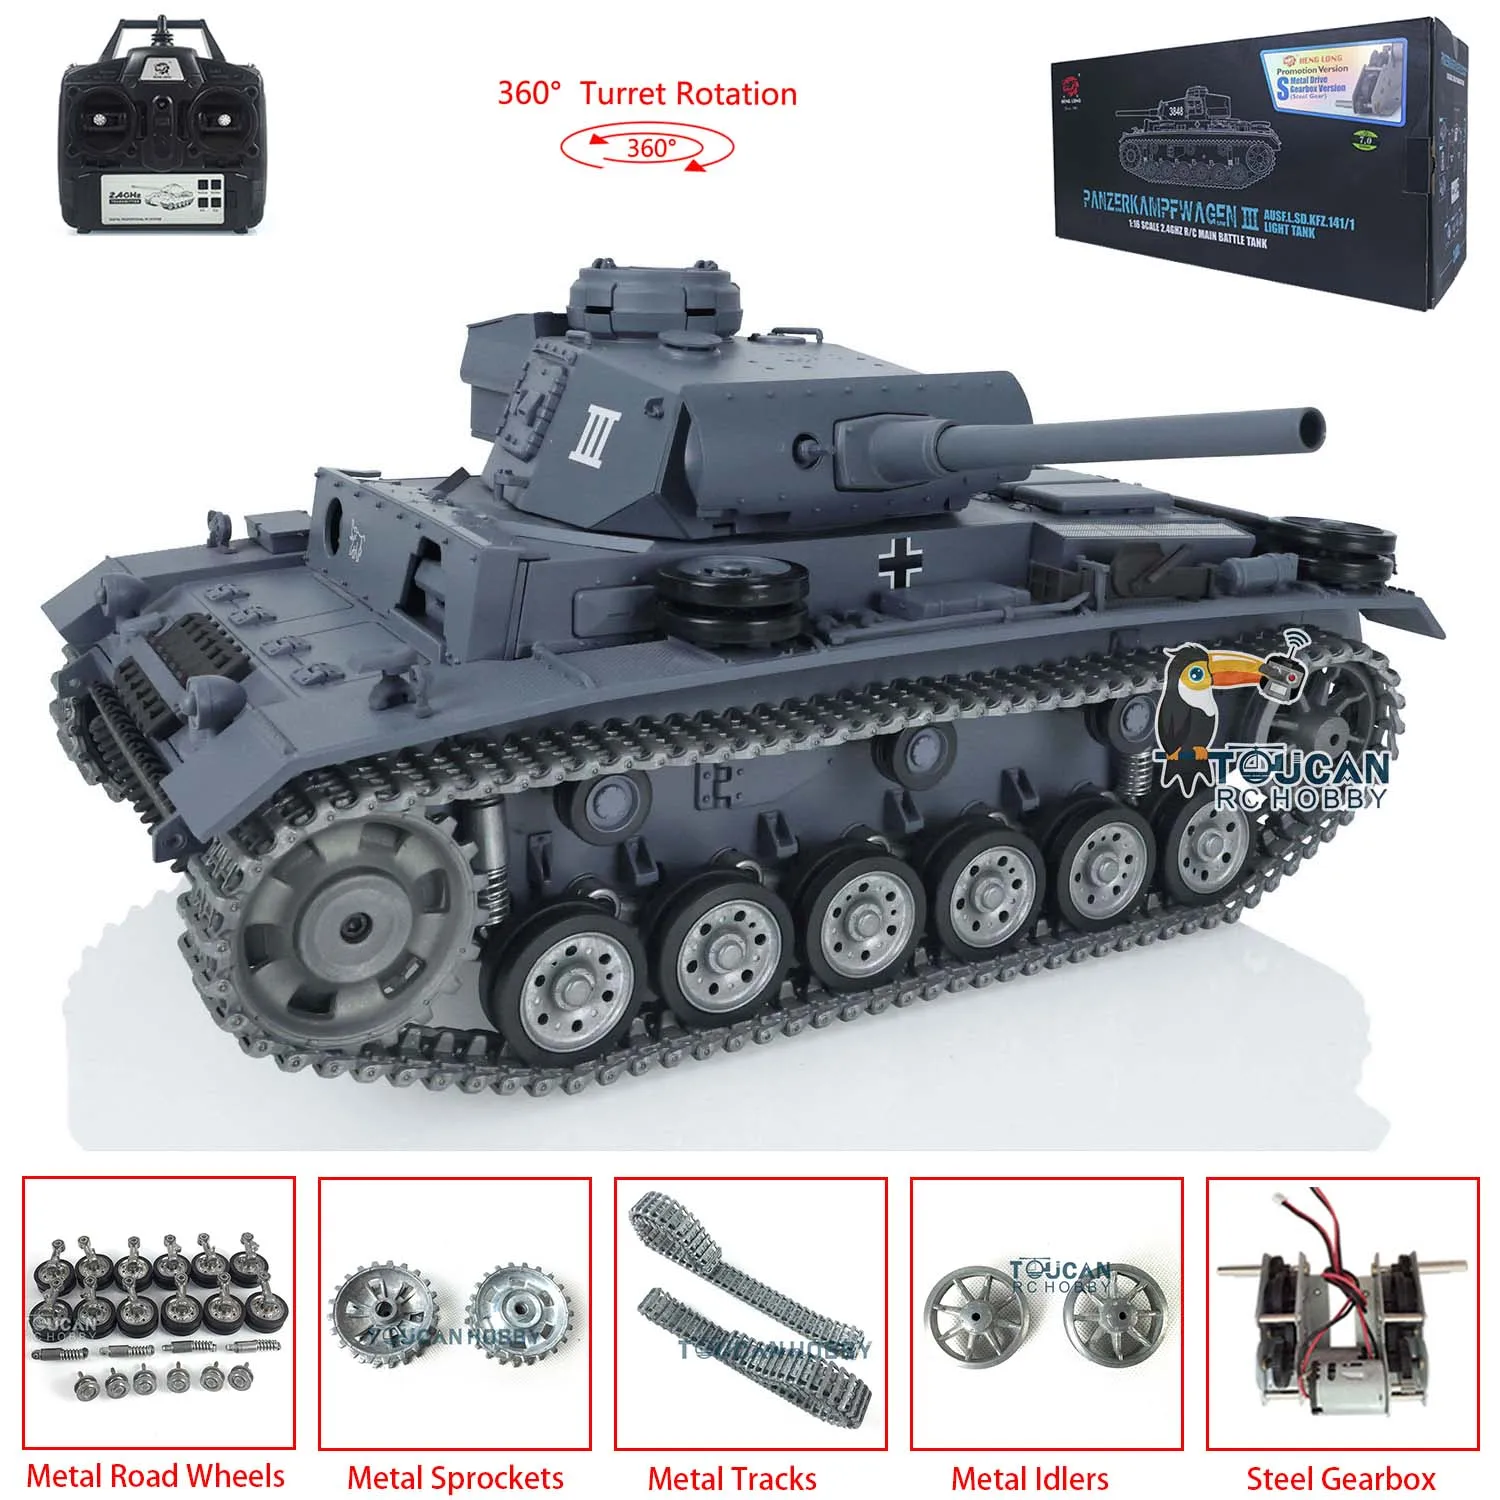 

1/16 7.0 HENG LONG FPV Customized Panzer III L RTR RC Tank 3848 Metal Track Wheel Ready to Run Toys for Boys TH17346-SMT7